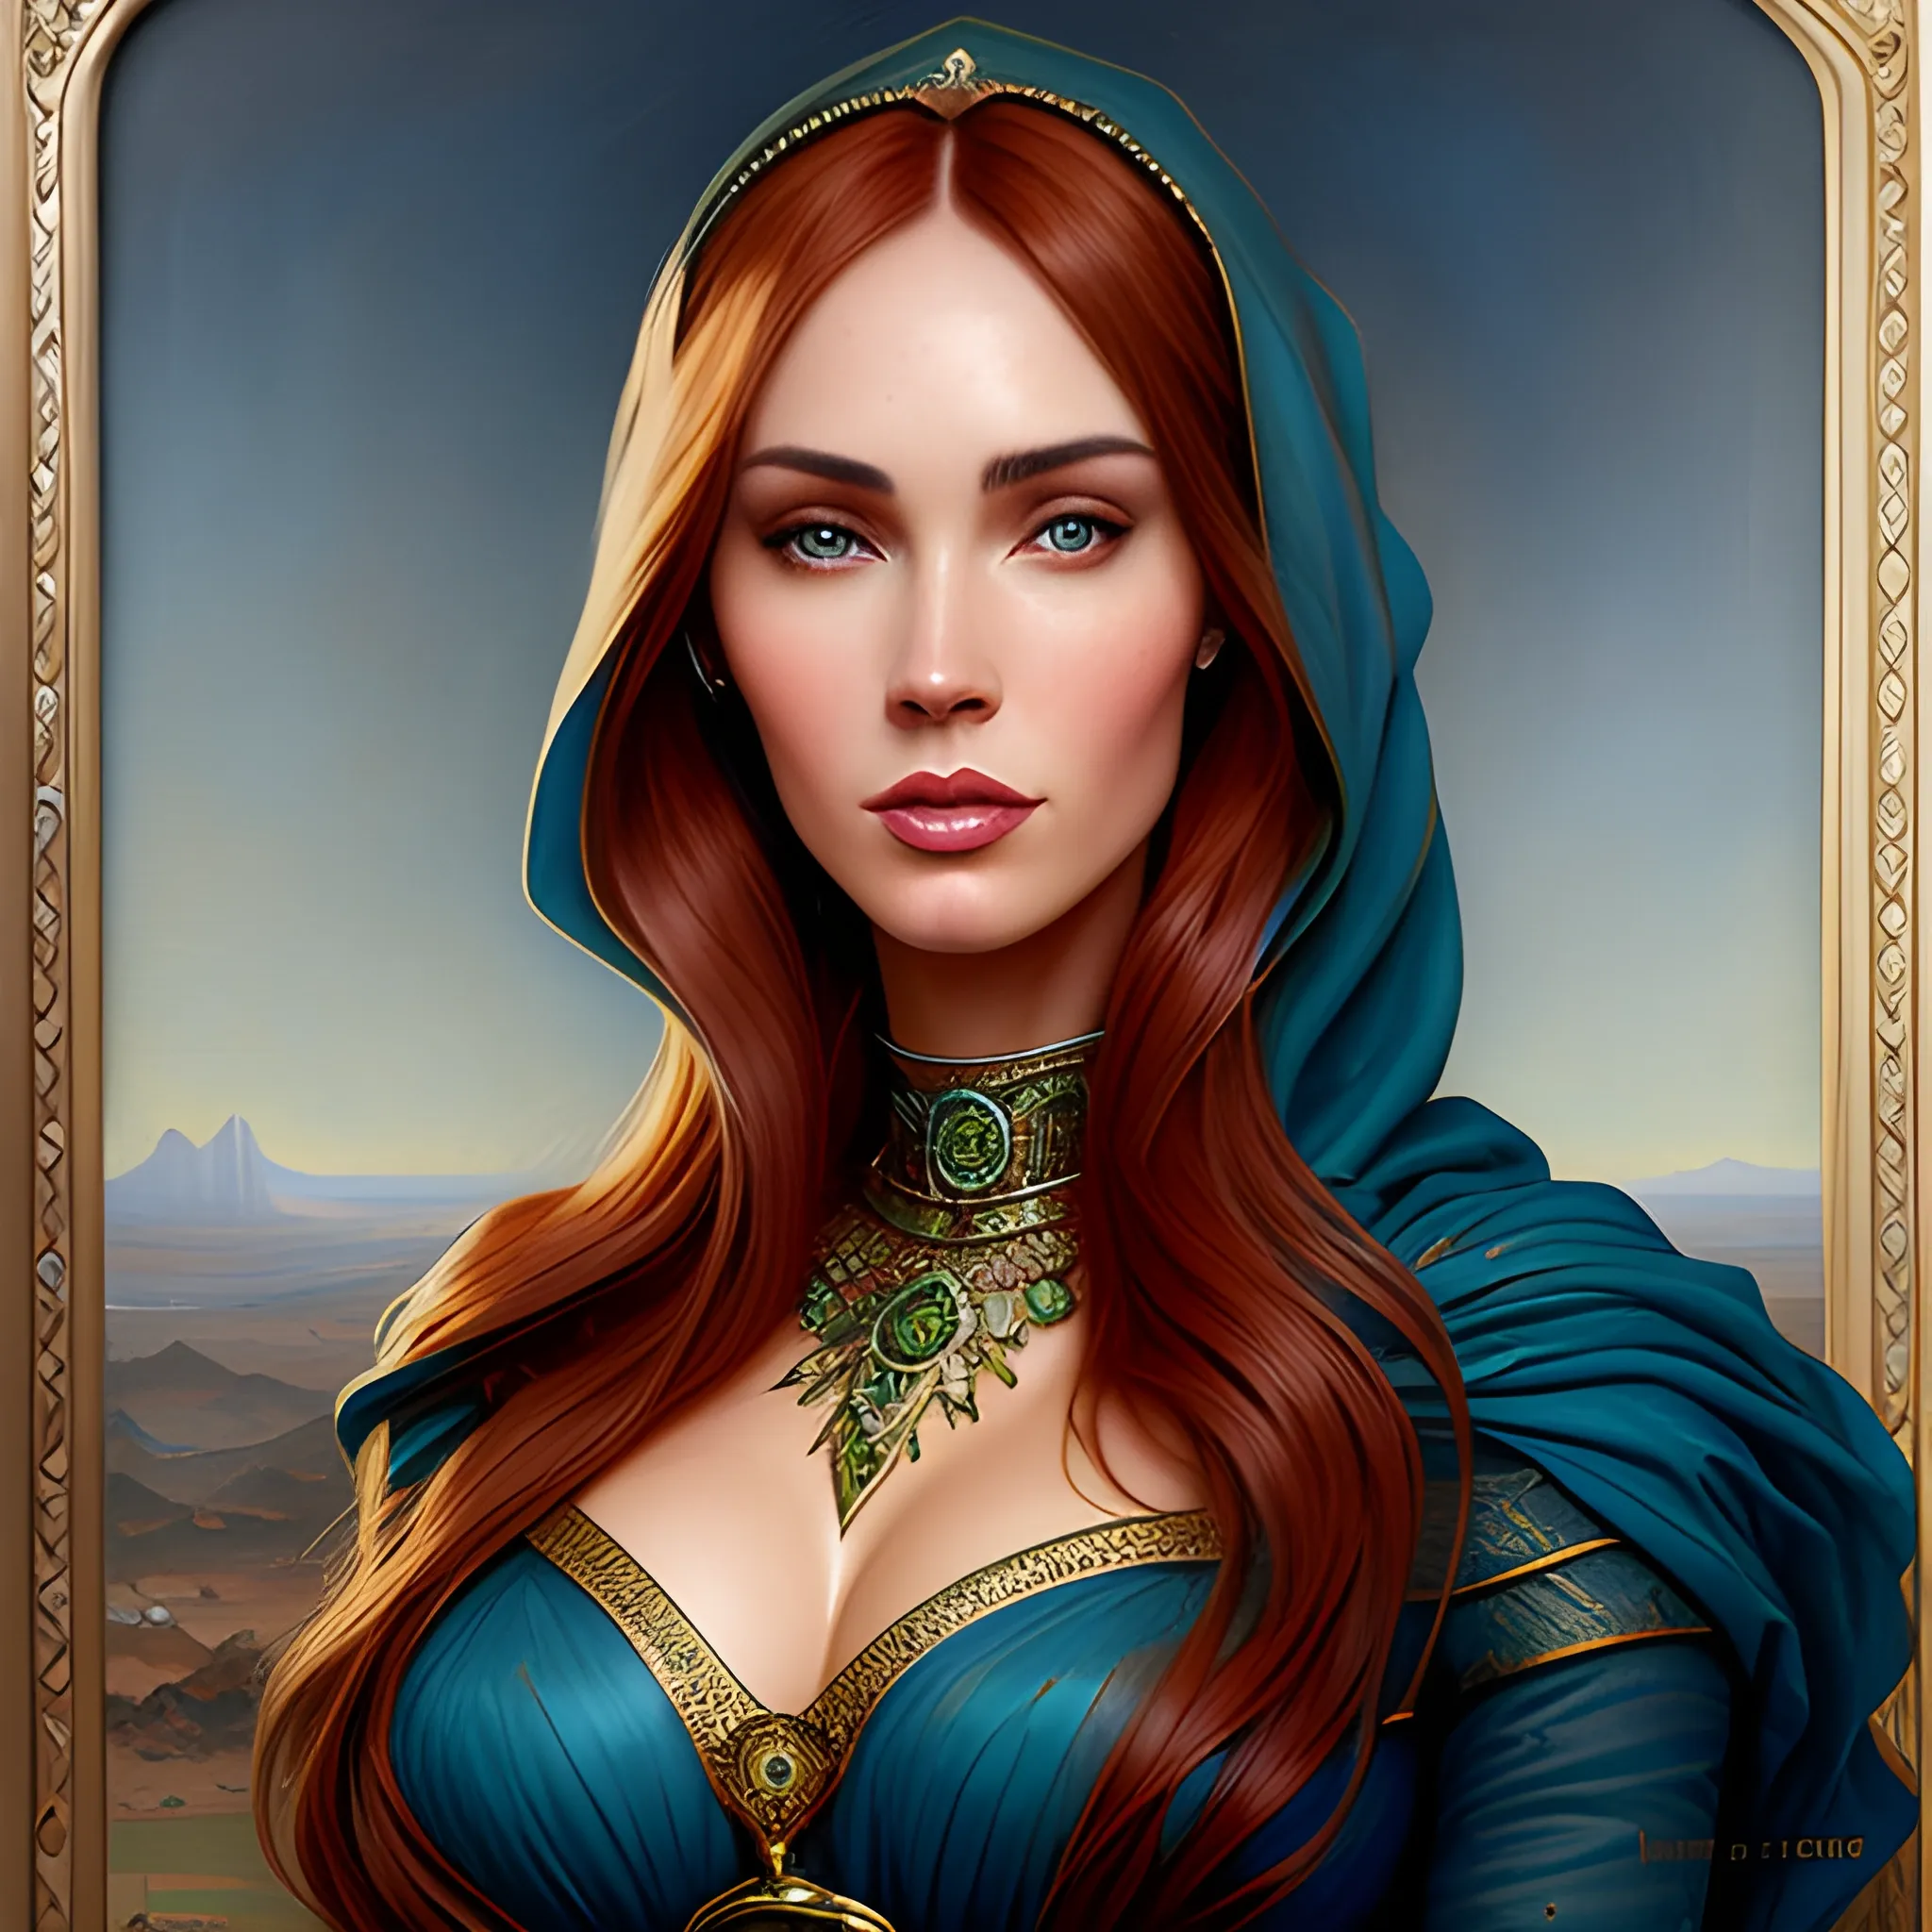 megan denise fox, highly detailed digital art, highly detailed beautiful young woman with auburn hair and plump lips and beautiful high cheekbones and beautiful blue dress with a blue hijab, oil painting, 16k, tom bagshaw style, arte oil painting, emile vernon style, painting by daniel f gerhartz.
